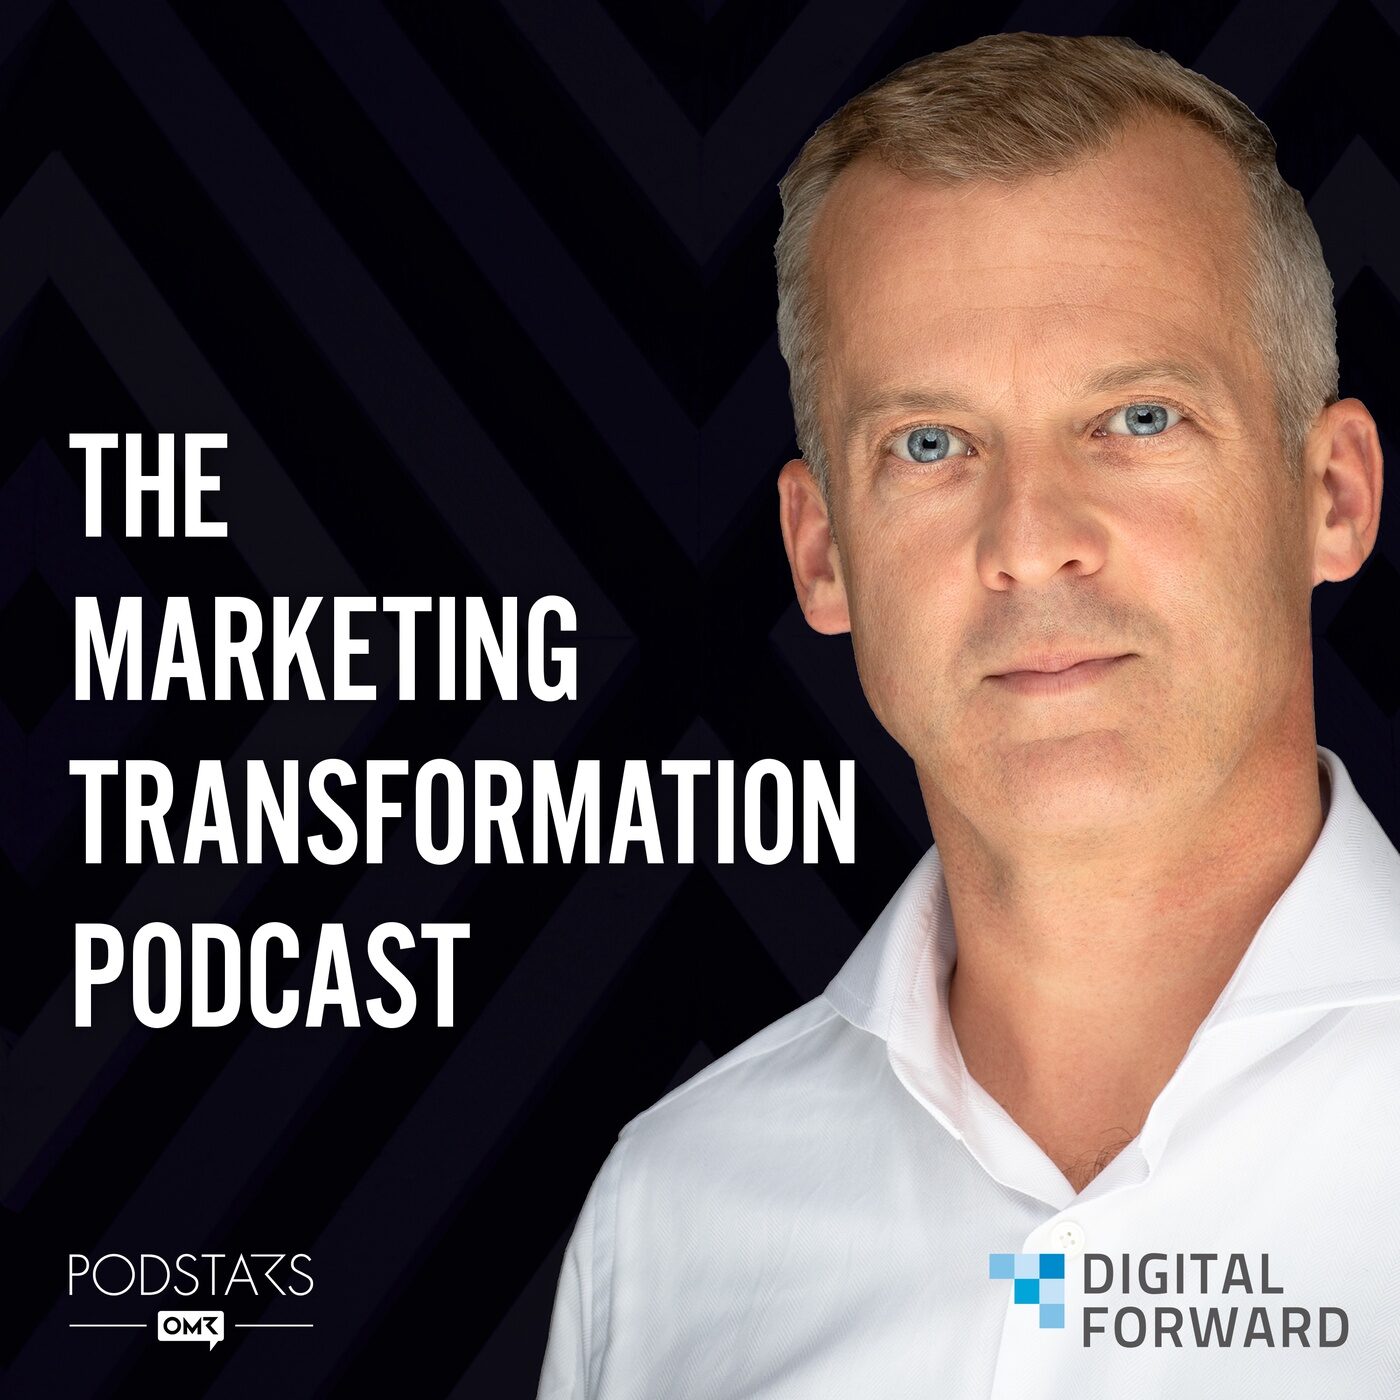 Podcast The Marketing Transformation